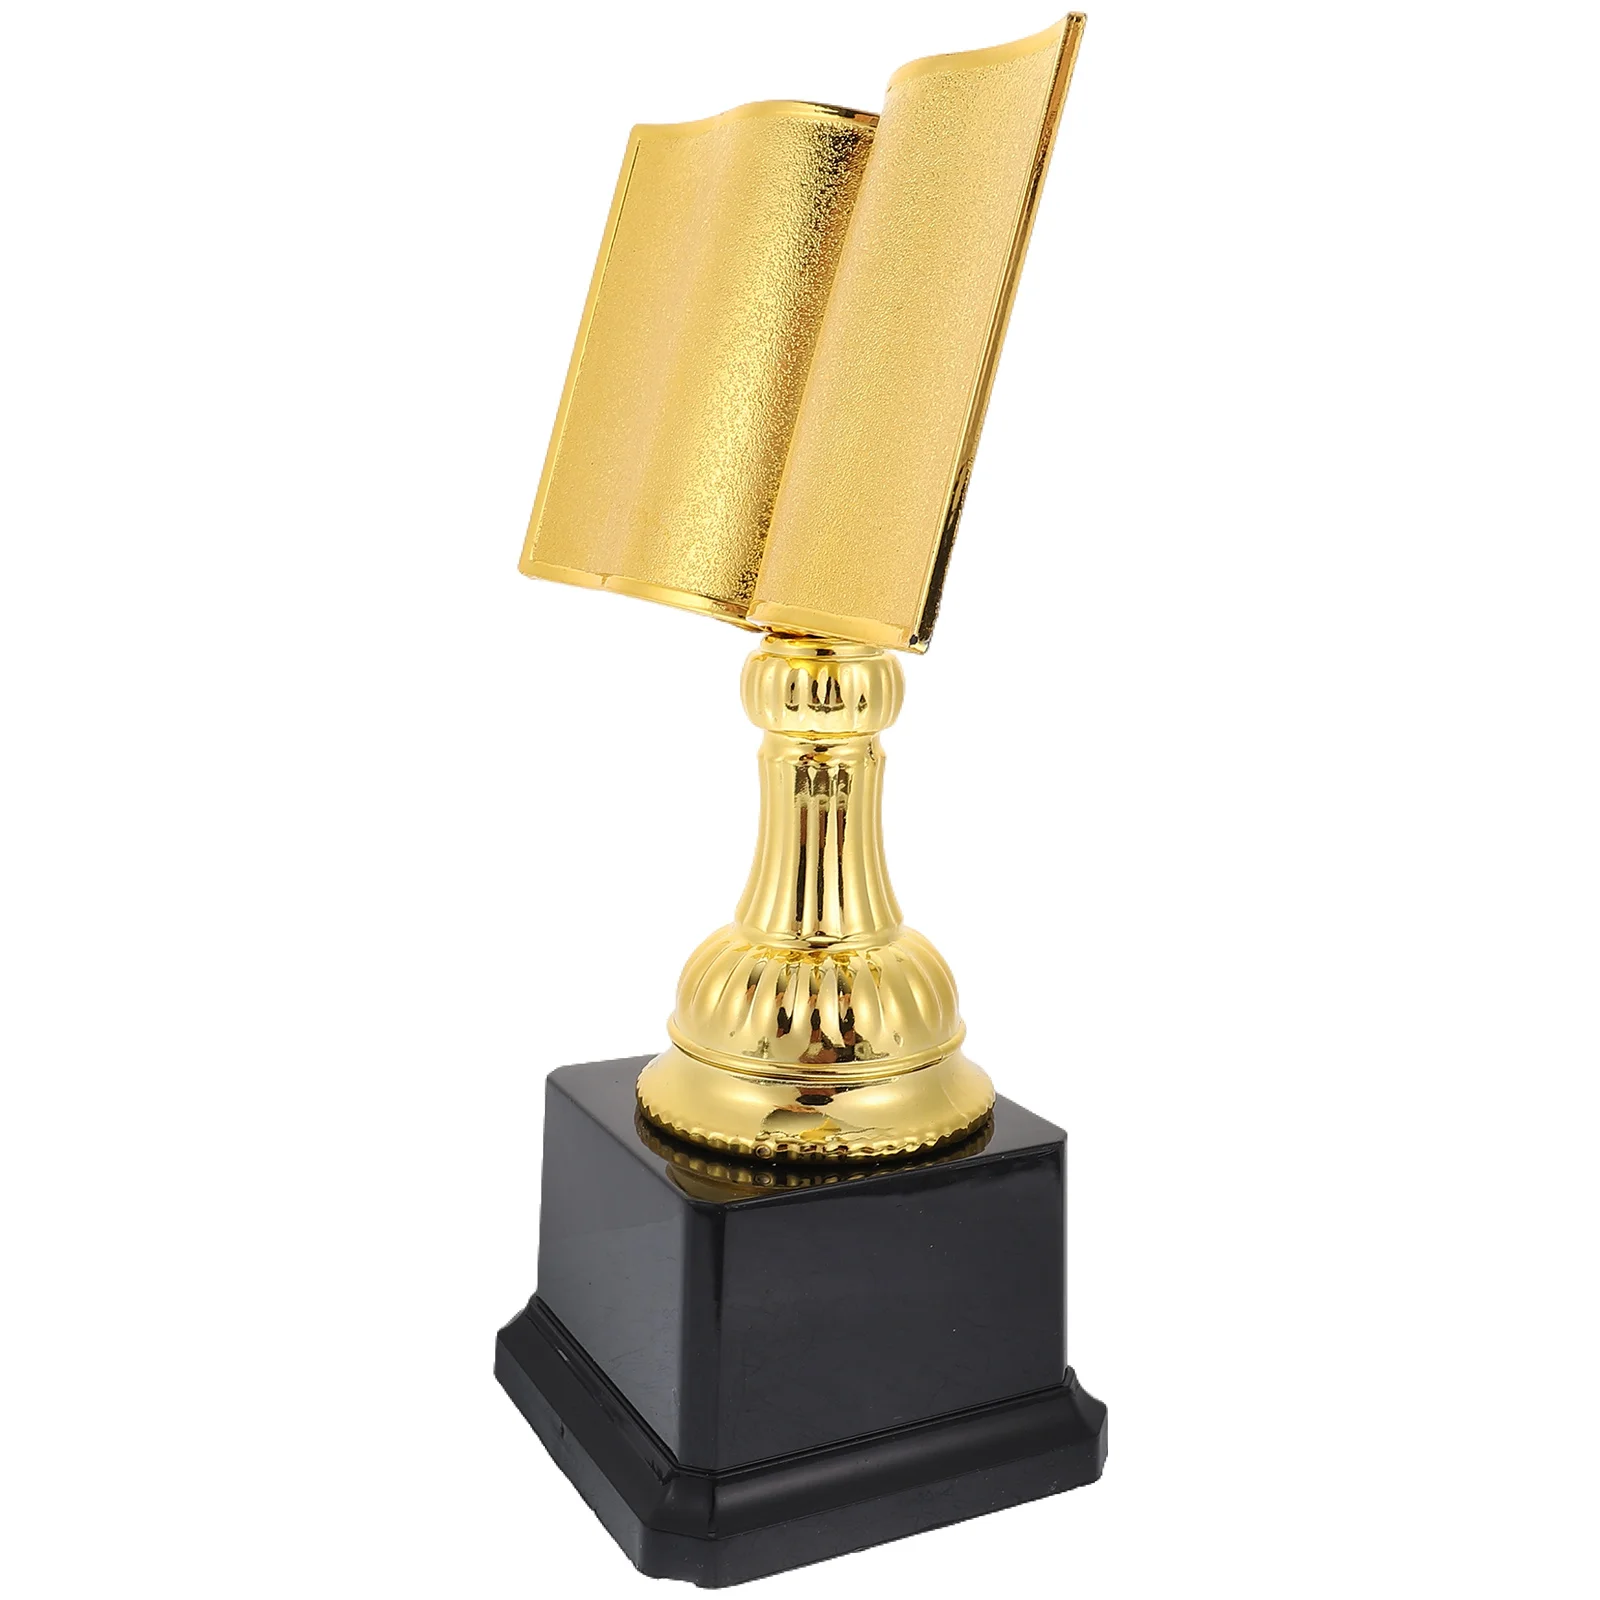 

Trophies Reading Star Trophy Delicate Prize Sports Exquisite Small Competition Compact Award Awards